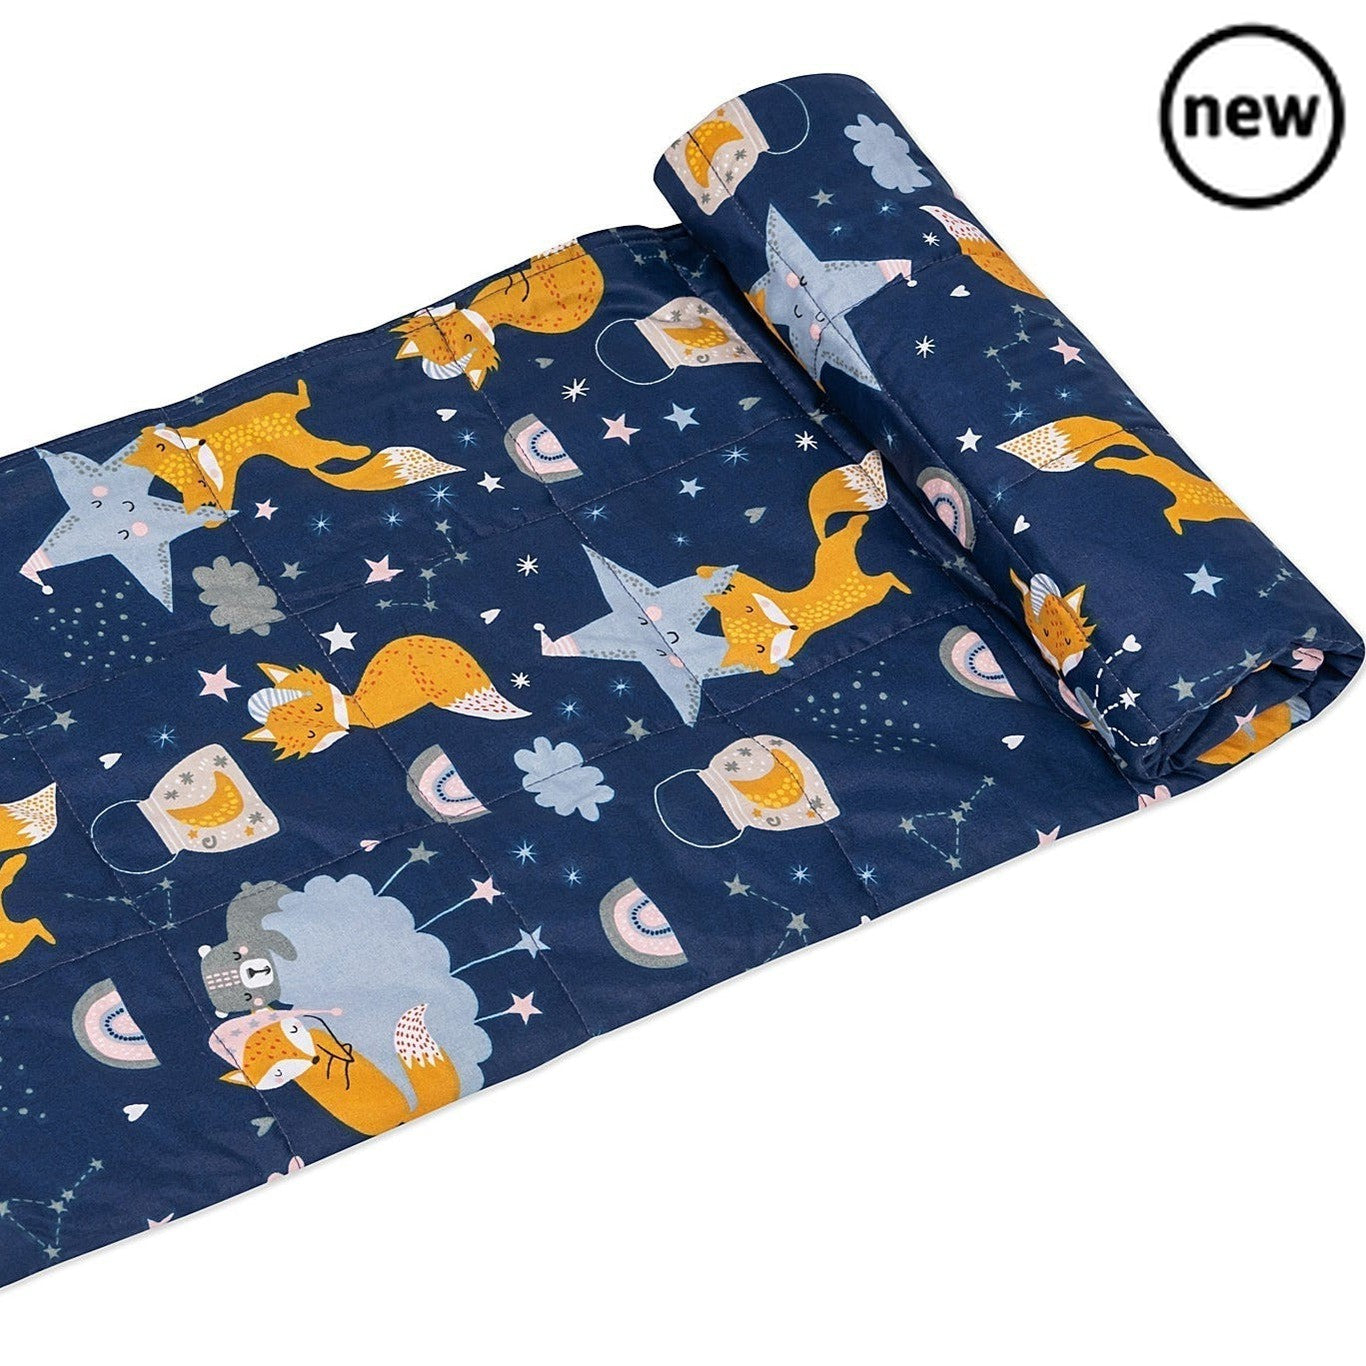 Sleeping Foxes Cotton Weighted Blanket, Introducing our Sleeping Foxes Cotton Weighted Blanket – a cozy haven of comfort entirely crafted for your individual preferences. Handmade from start to finish, this 100% cotton weighted blanket features delightful sleeping foxes, offering a personalized touch that caters to all age groups. Key Features: Handmade Excellence: Immerse yourself in the enchanting world of sleeping foxes with our entirely handmade weighted blanket. Customize every detail, from backing fab